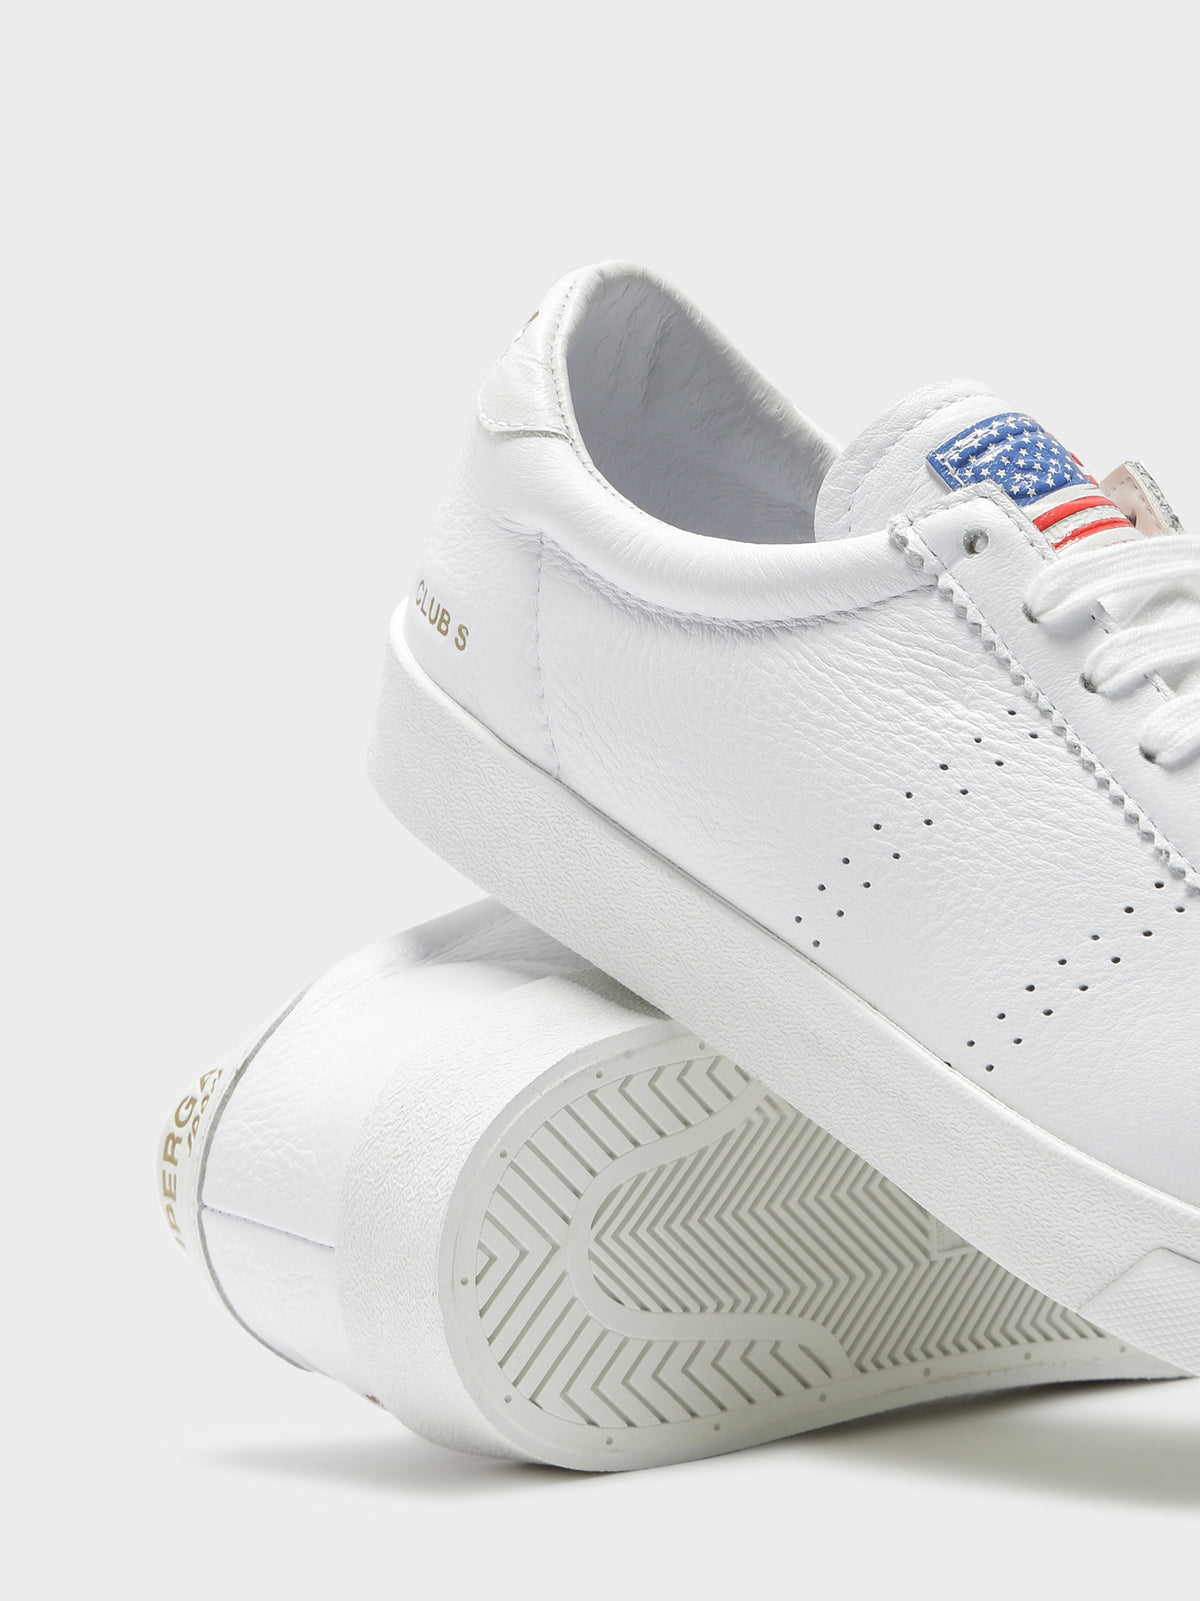 Unisex 2869 Club Comfleau USA Sneakers in White